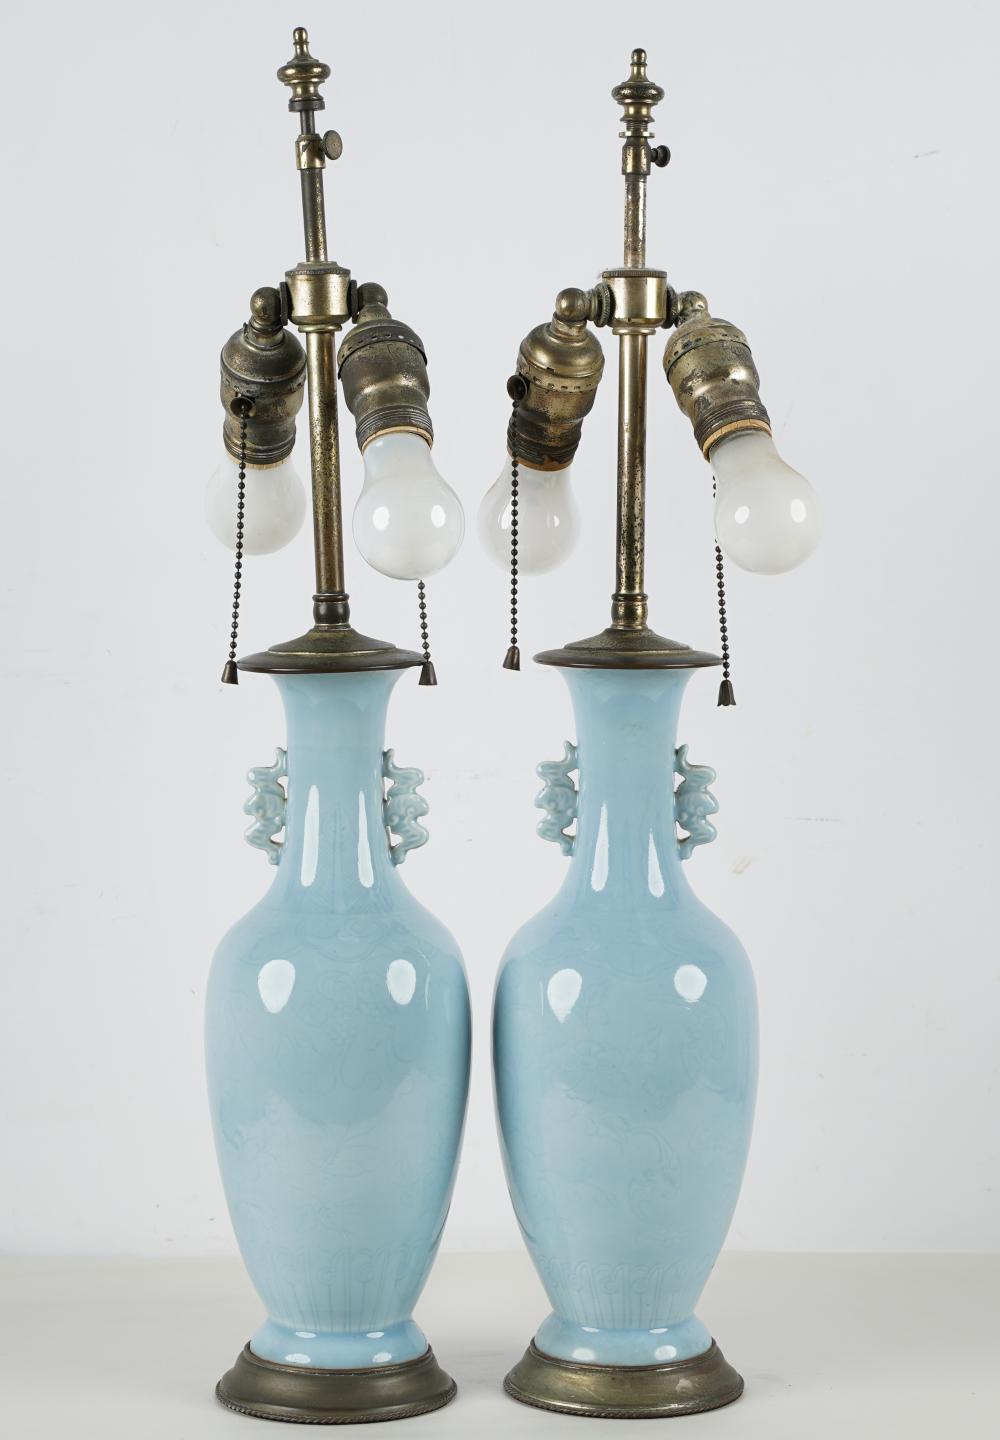 PAIR OF CHINESE PALE BLUE PORCELAIN